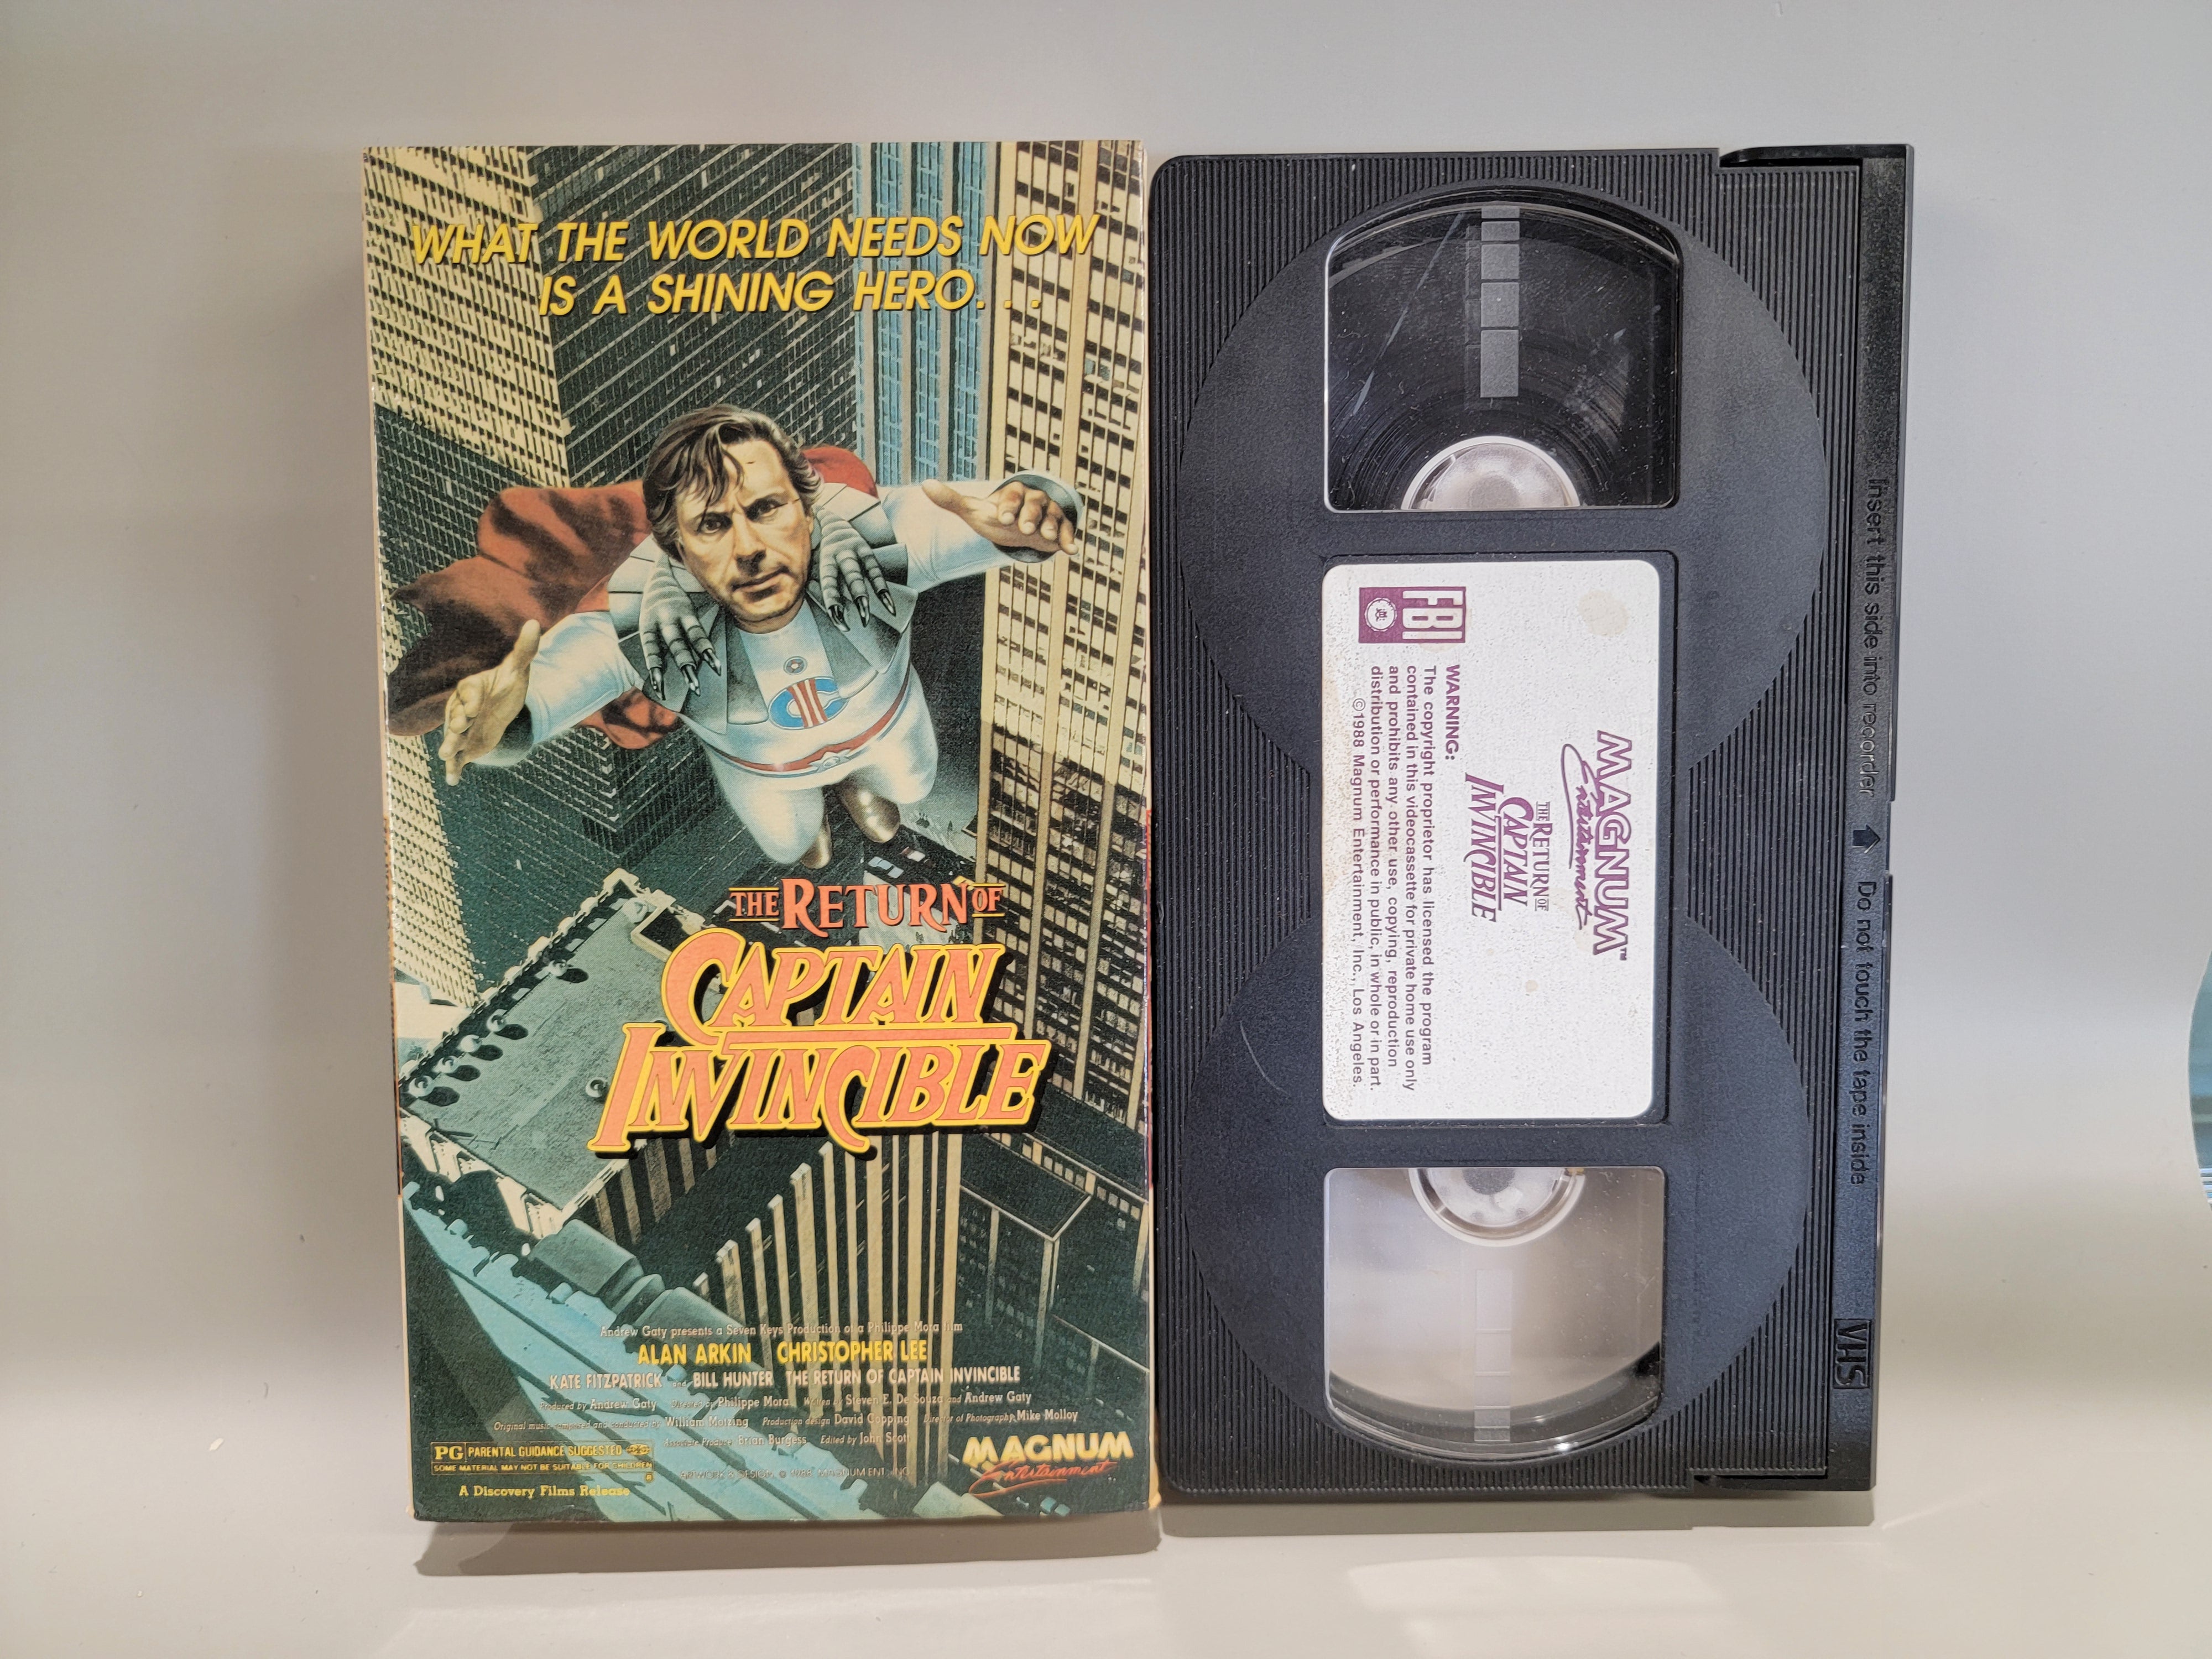 THE RETURN OF CAPTAIN INVINCIBLE VHS [USED]